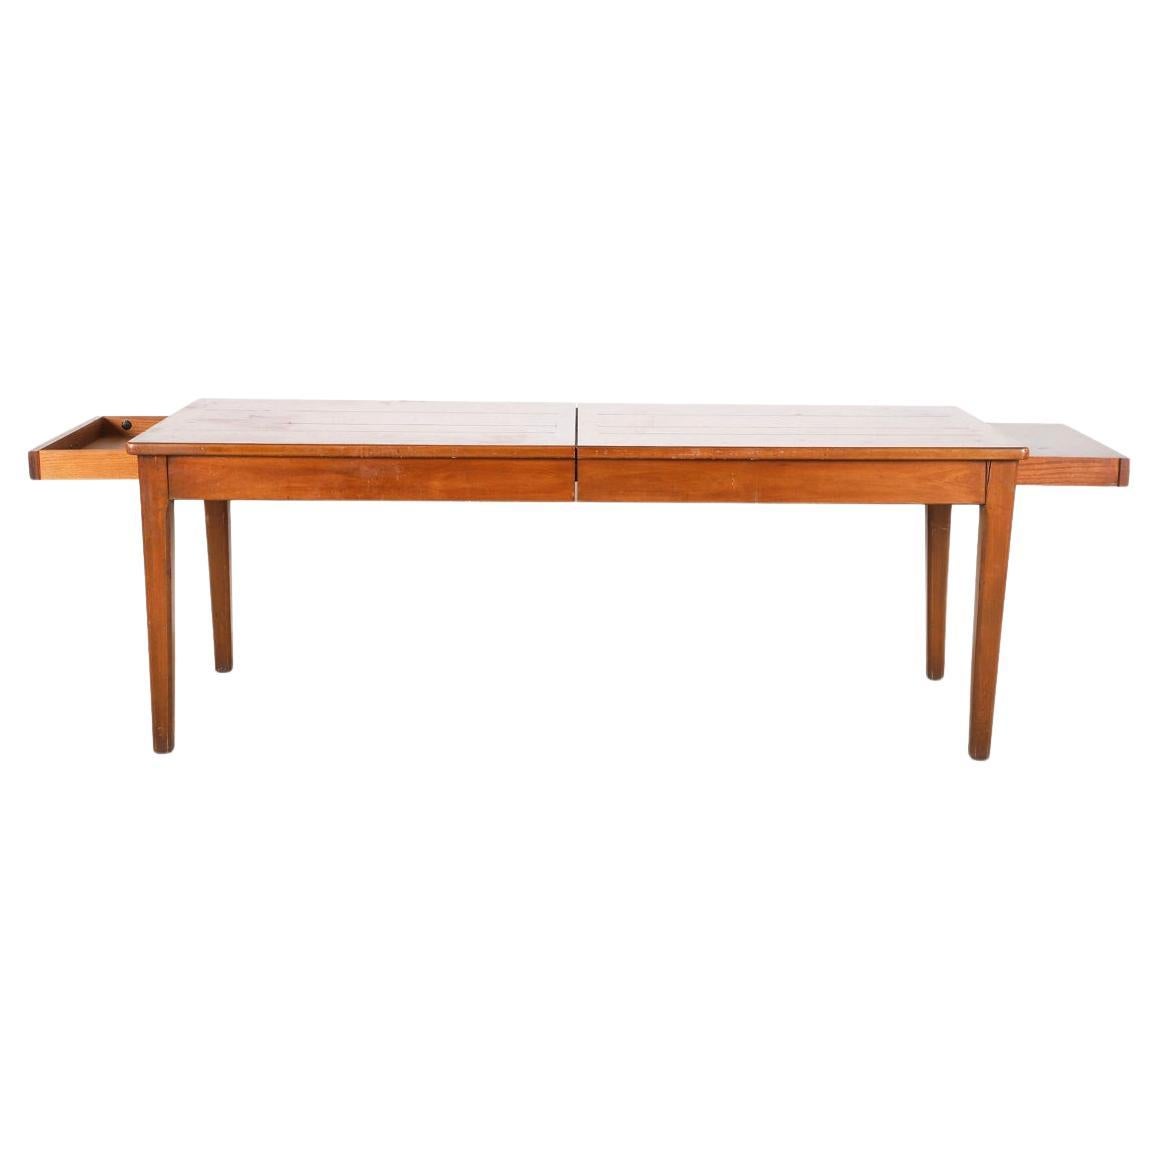 John Stuart oak modern version farm table style 4 plank detail with edge detail on 4  square tapered legs. Has (1) silverware drawers at one end and a pull out server on the other . Good vintage condition very solid dining table. Labeled John Stuart